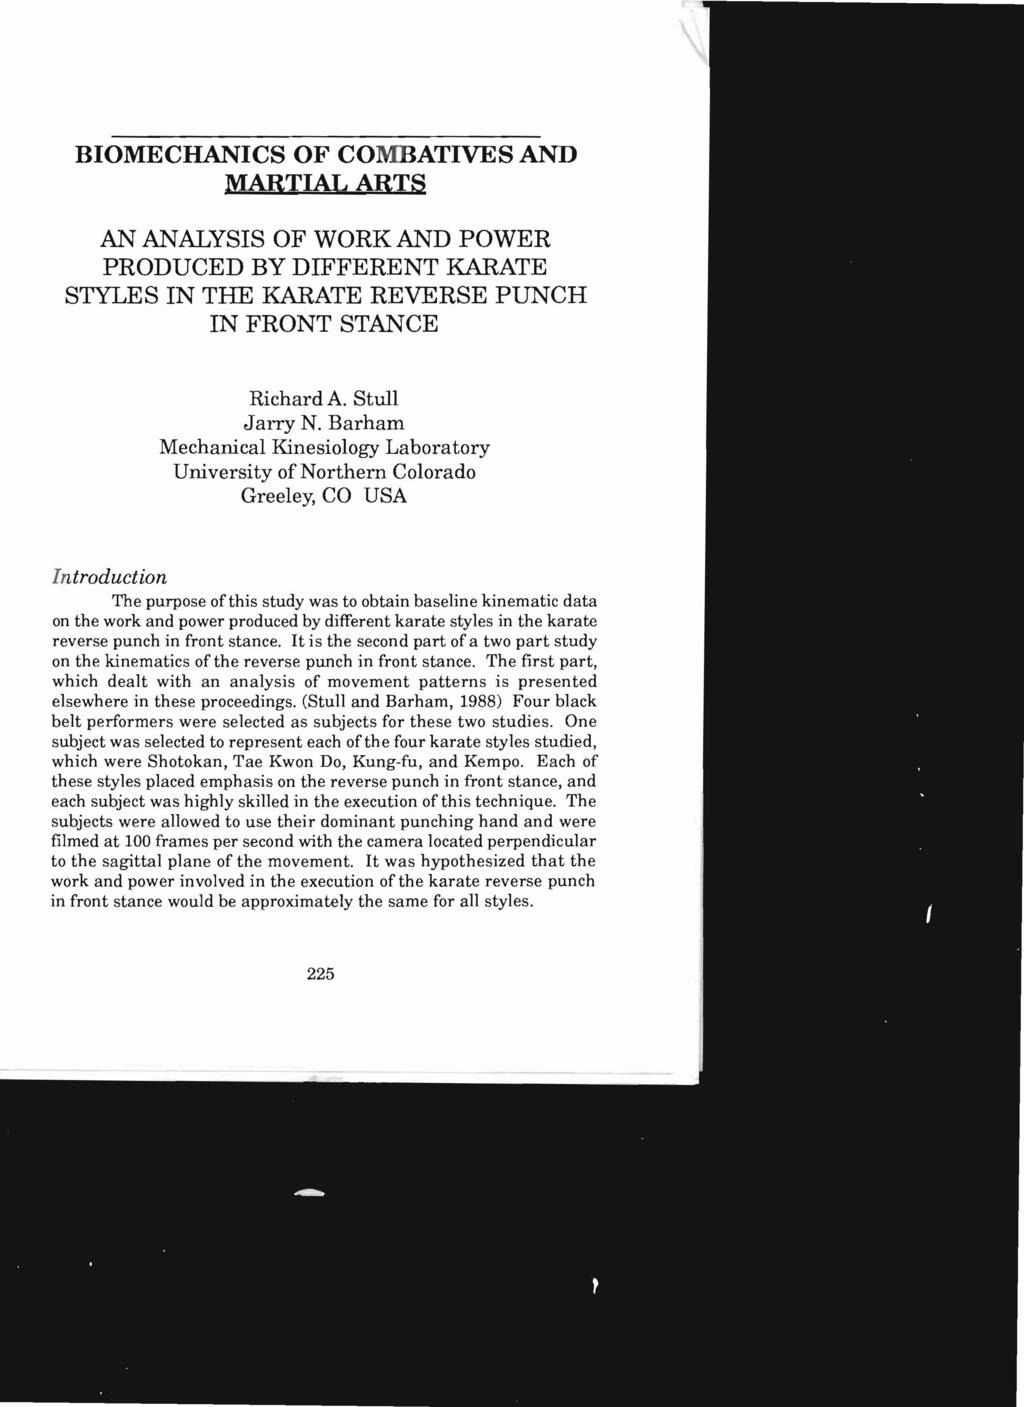 BIOMECHANICS OF COMBATIVES AND ~ AN ANALYSIS OF WORK AND POWER PRODUCED BY DIFFERENT KARATE STYLES IN THE KARATE REVERSE PUNCH IN FRONT STANCE Richard A. Stull Jarry N.